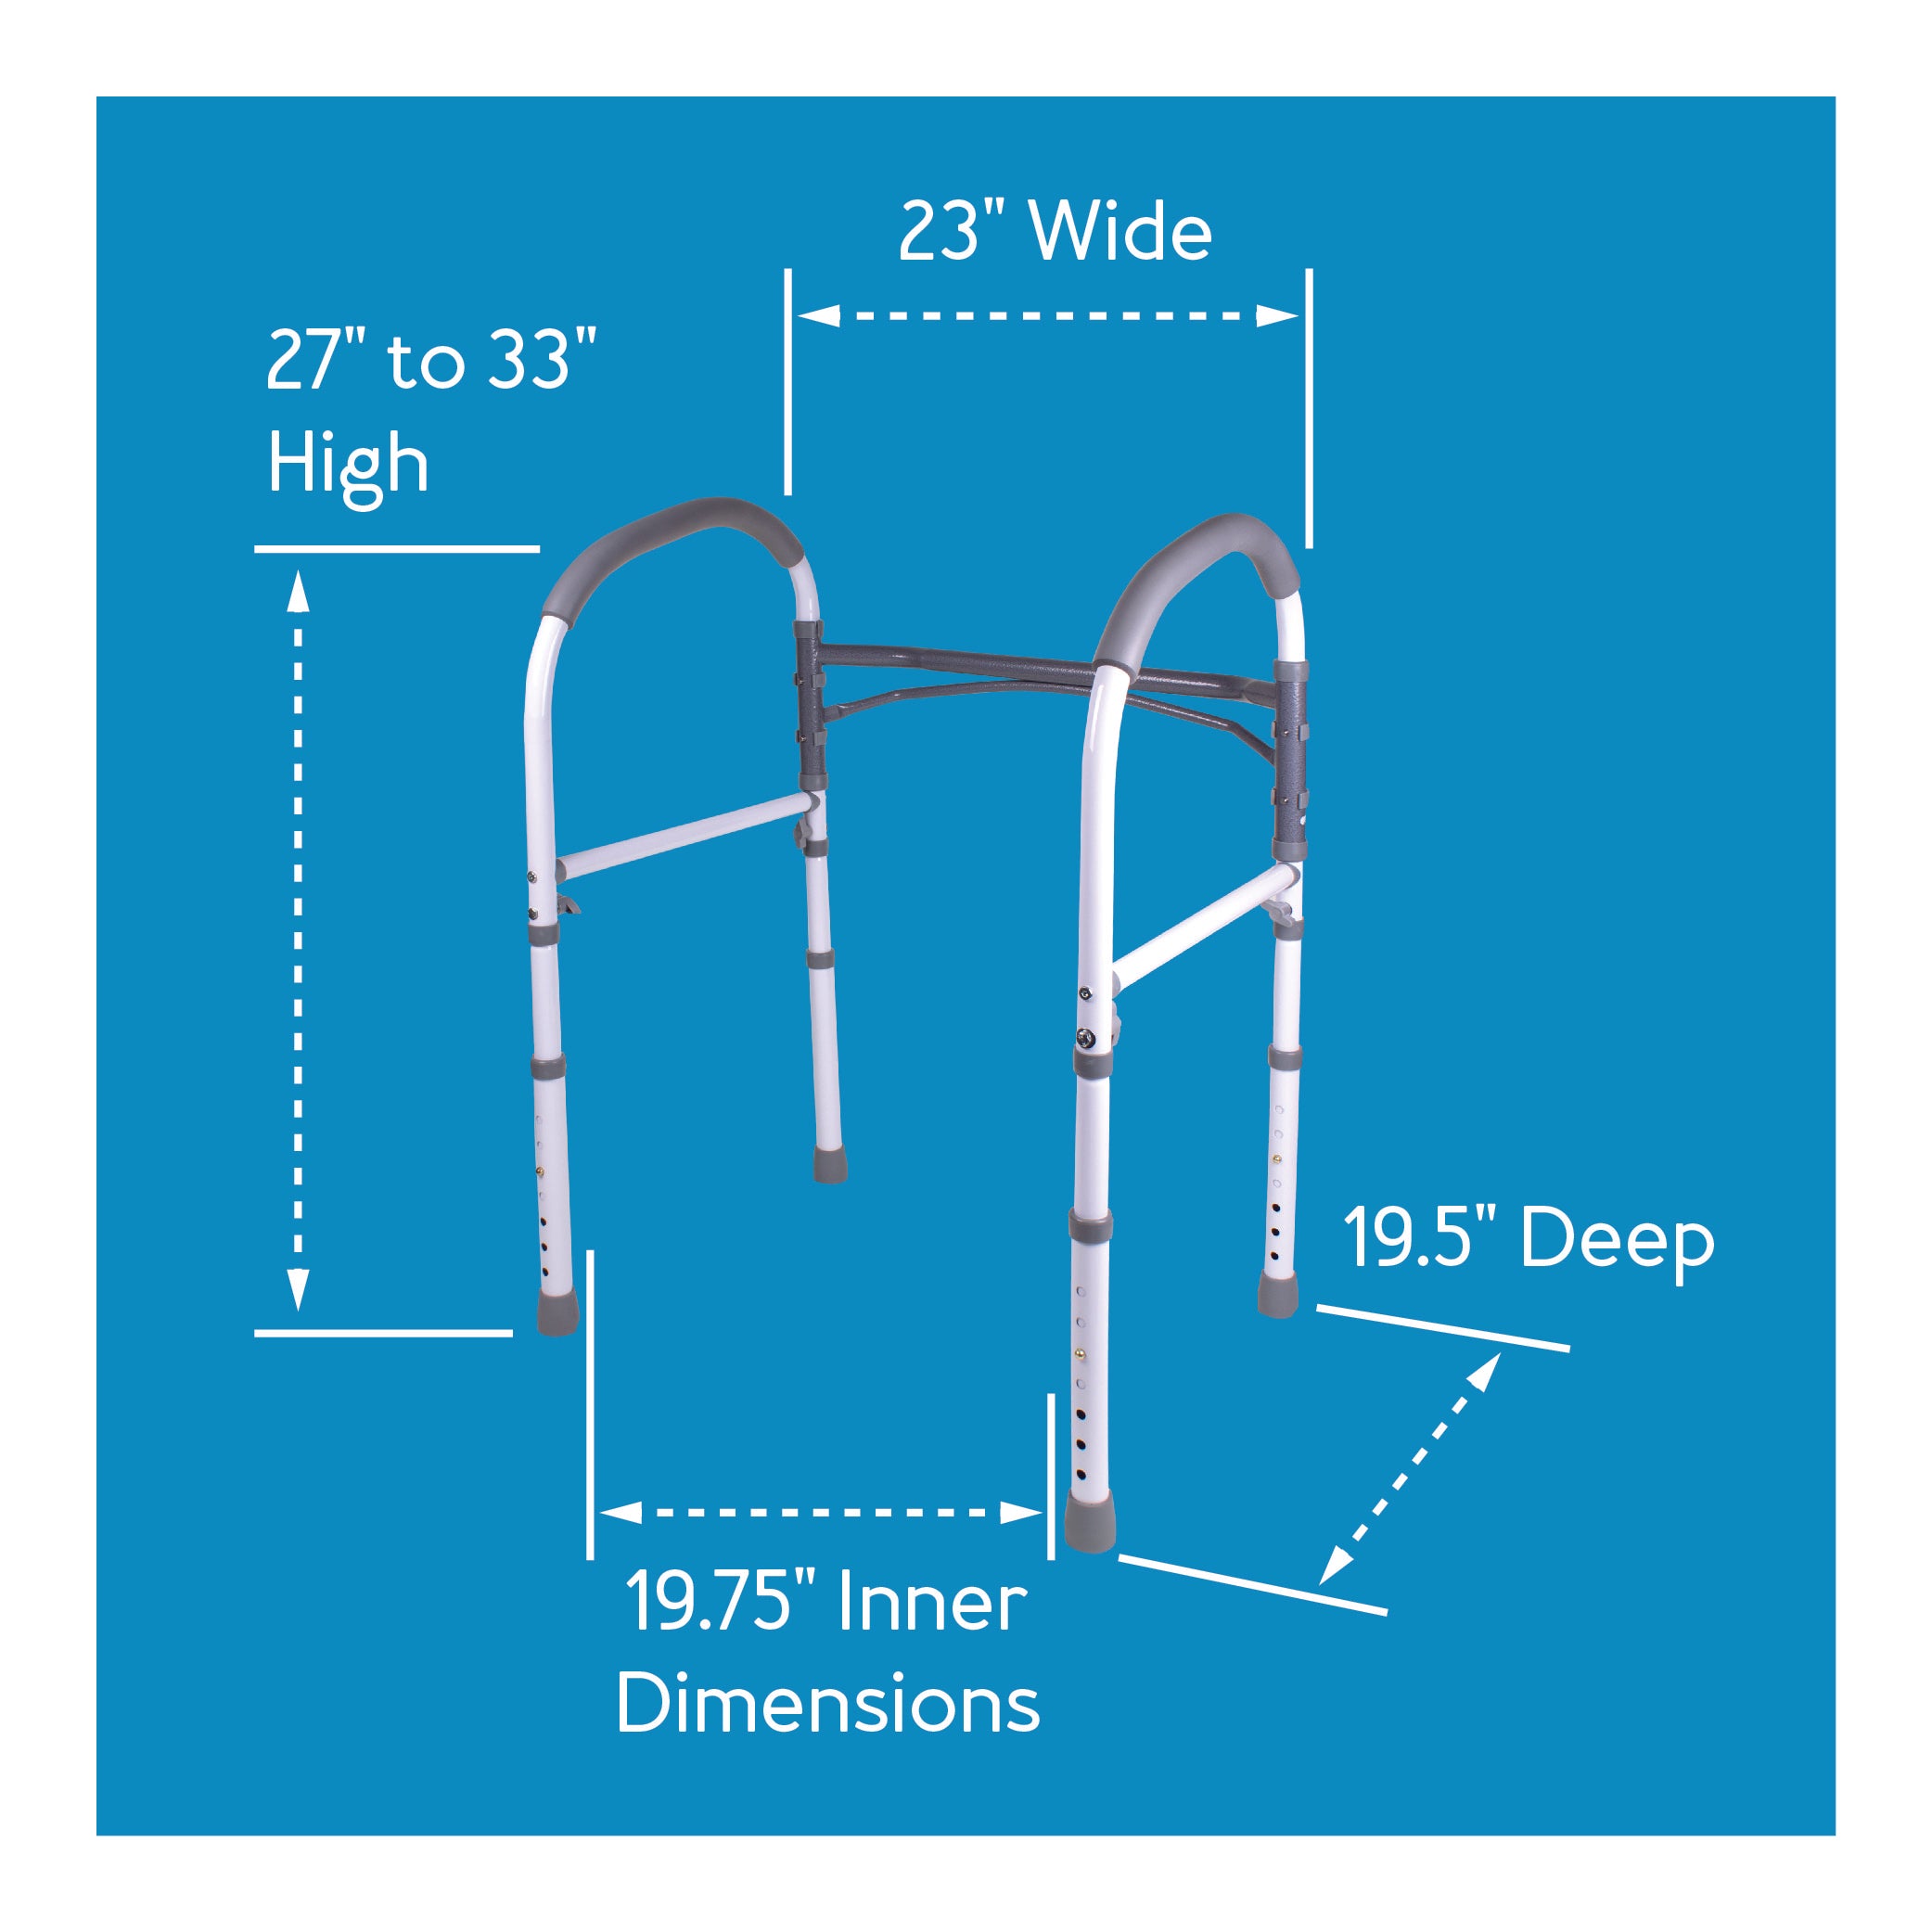 A safety rail with its dimensions outlined: 27